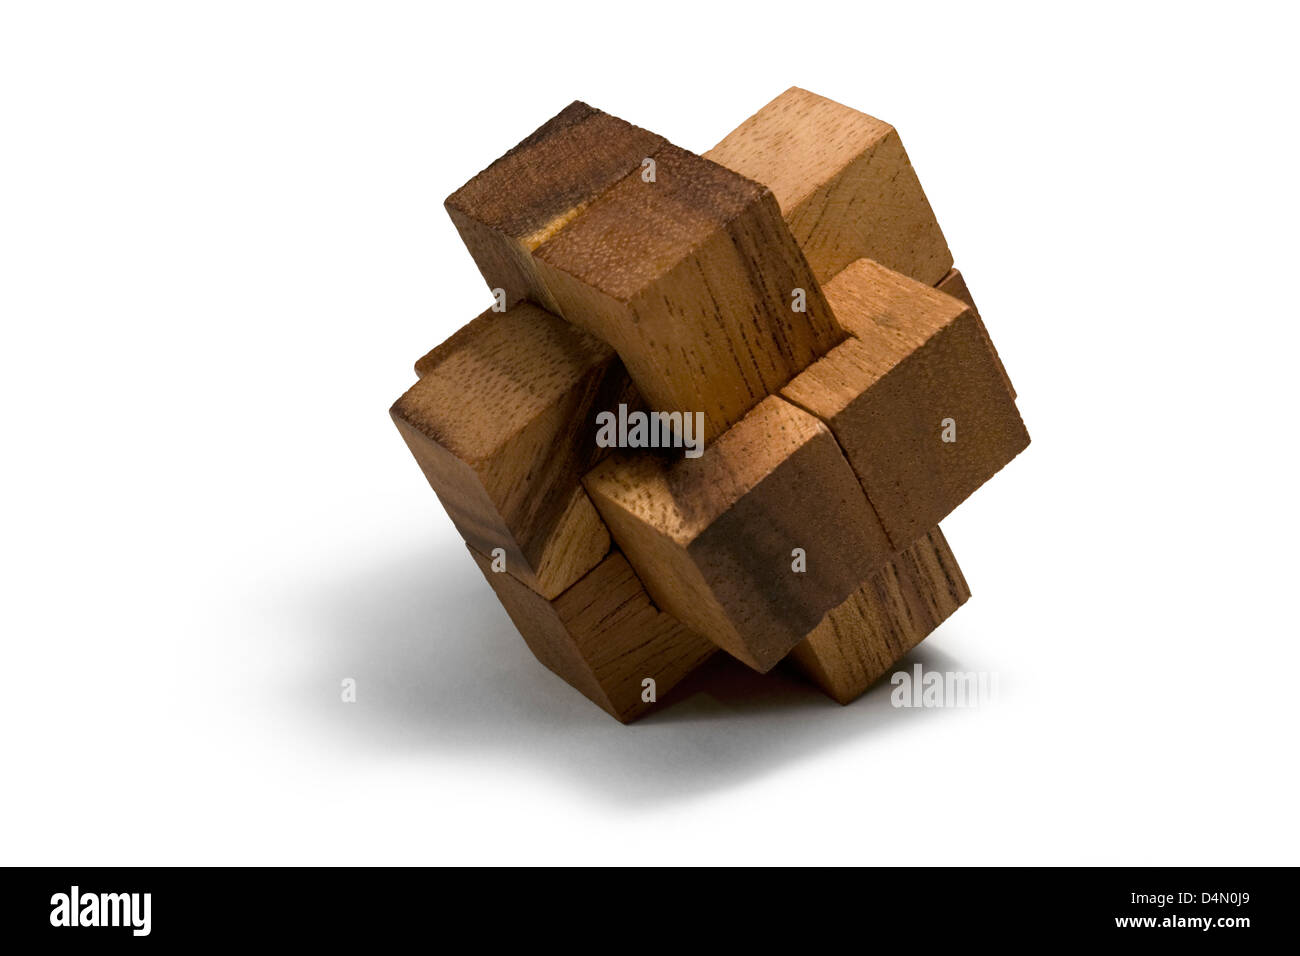 Mechanical Puzzle High Resolution Stock Photography and Images - Alamy